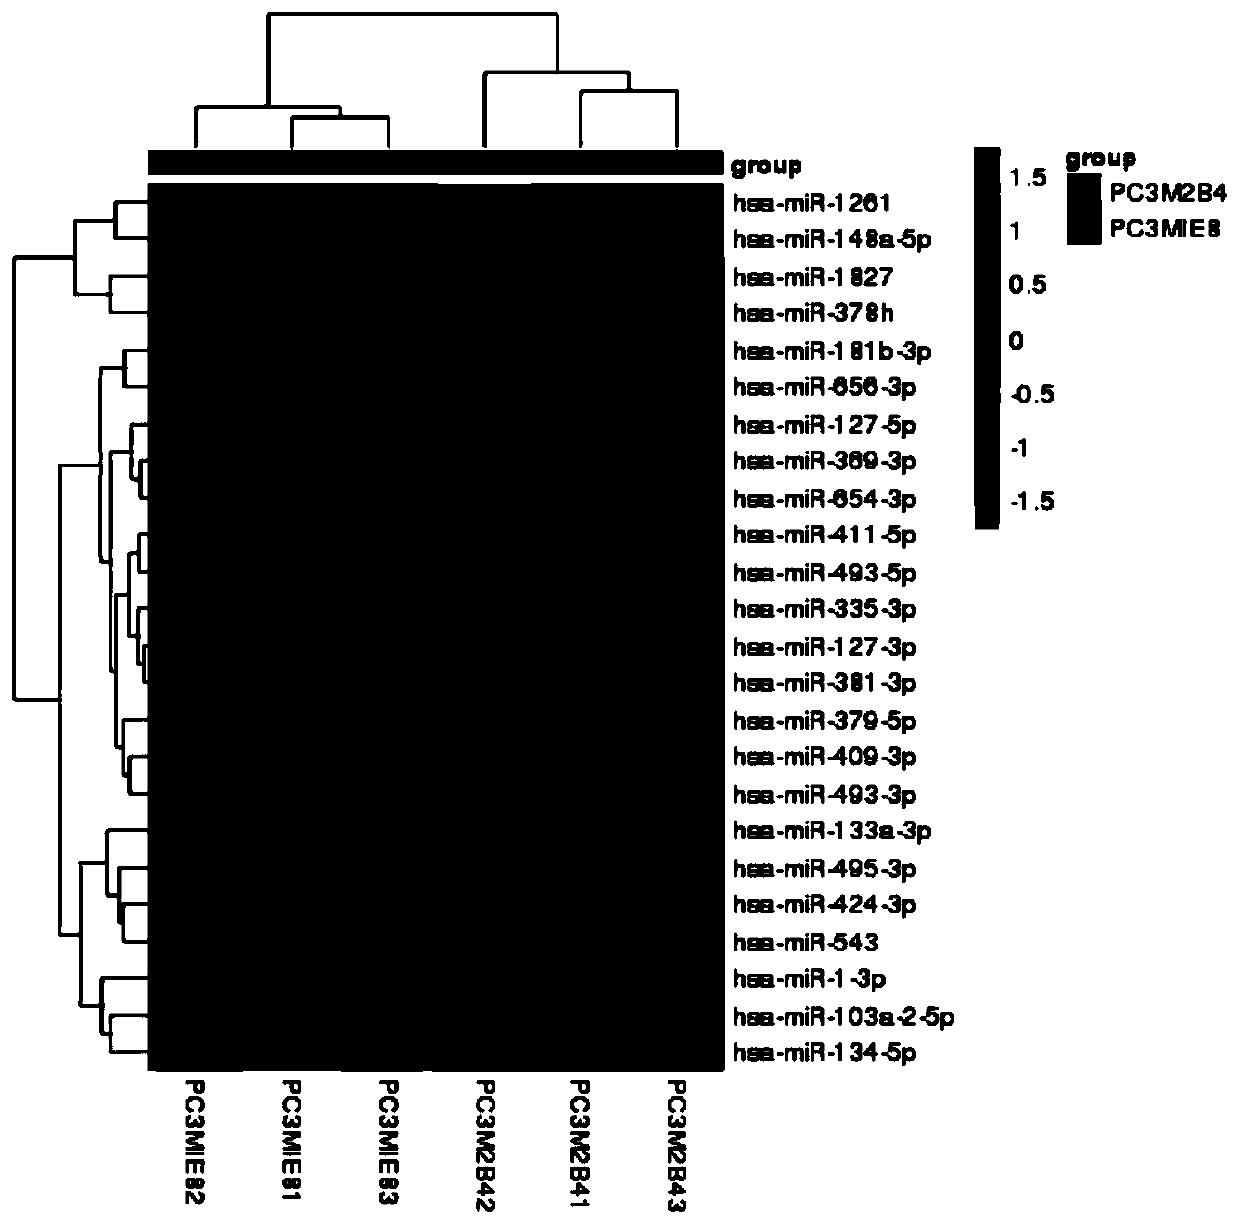 Method for data analysis of miRNA in animals with reference data based on miRBase database